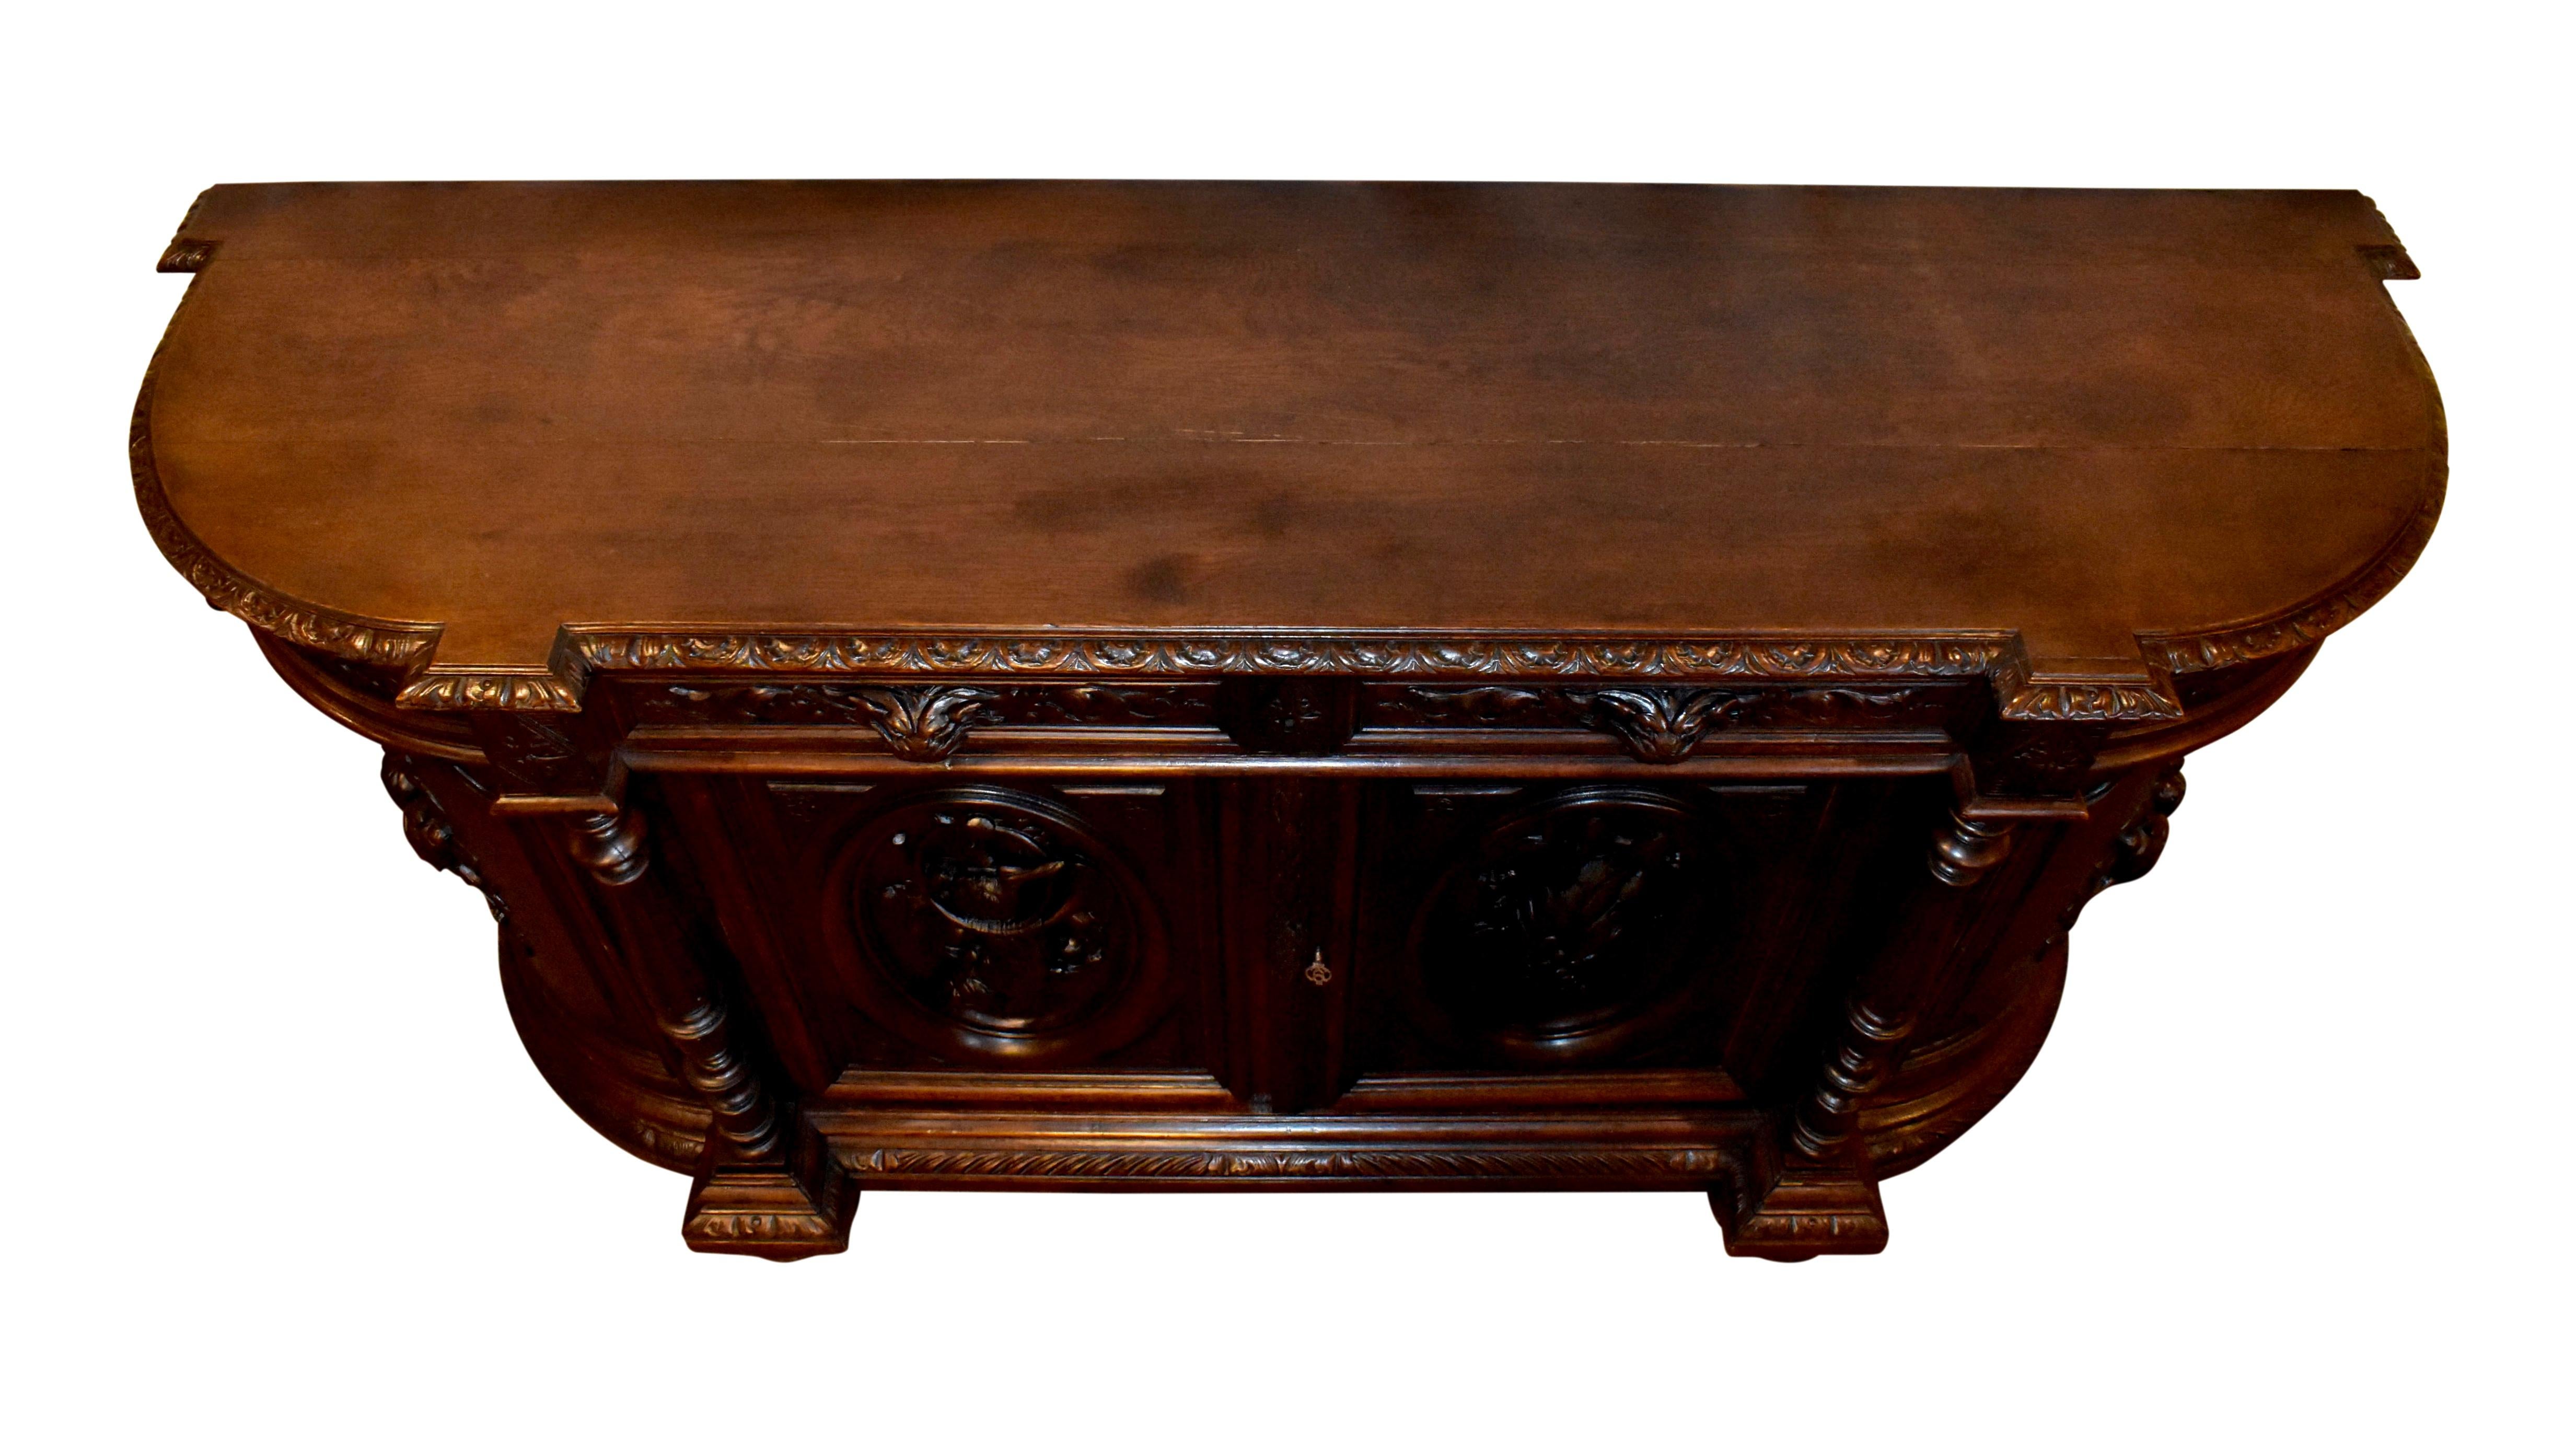 French Renaissance Revival Hunt Sideboard, circa 1895 For Sale 5